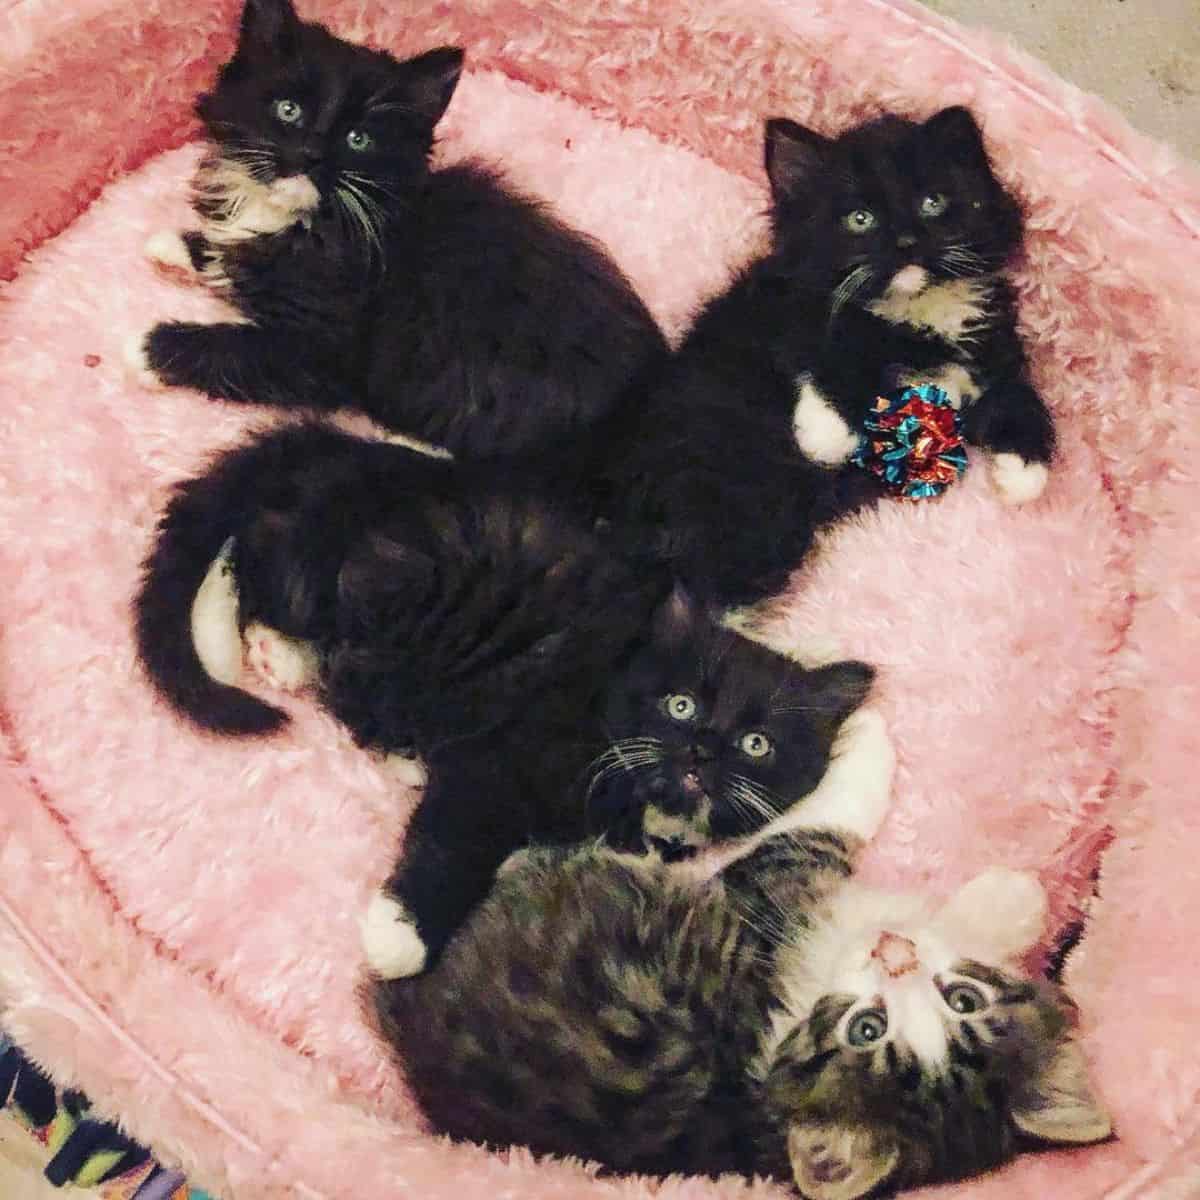 four cute kittens are lying on a pink pillow